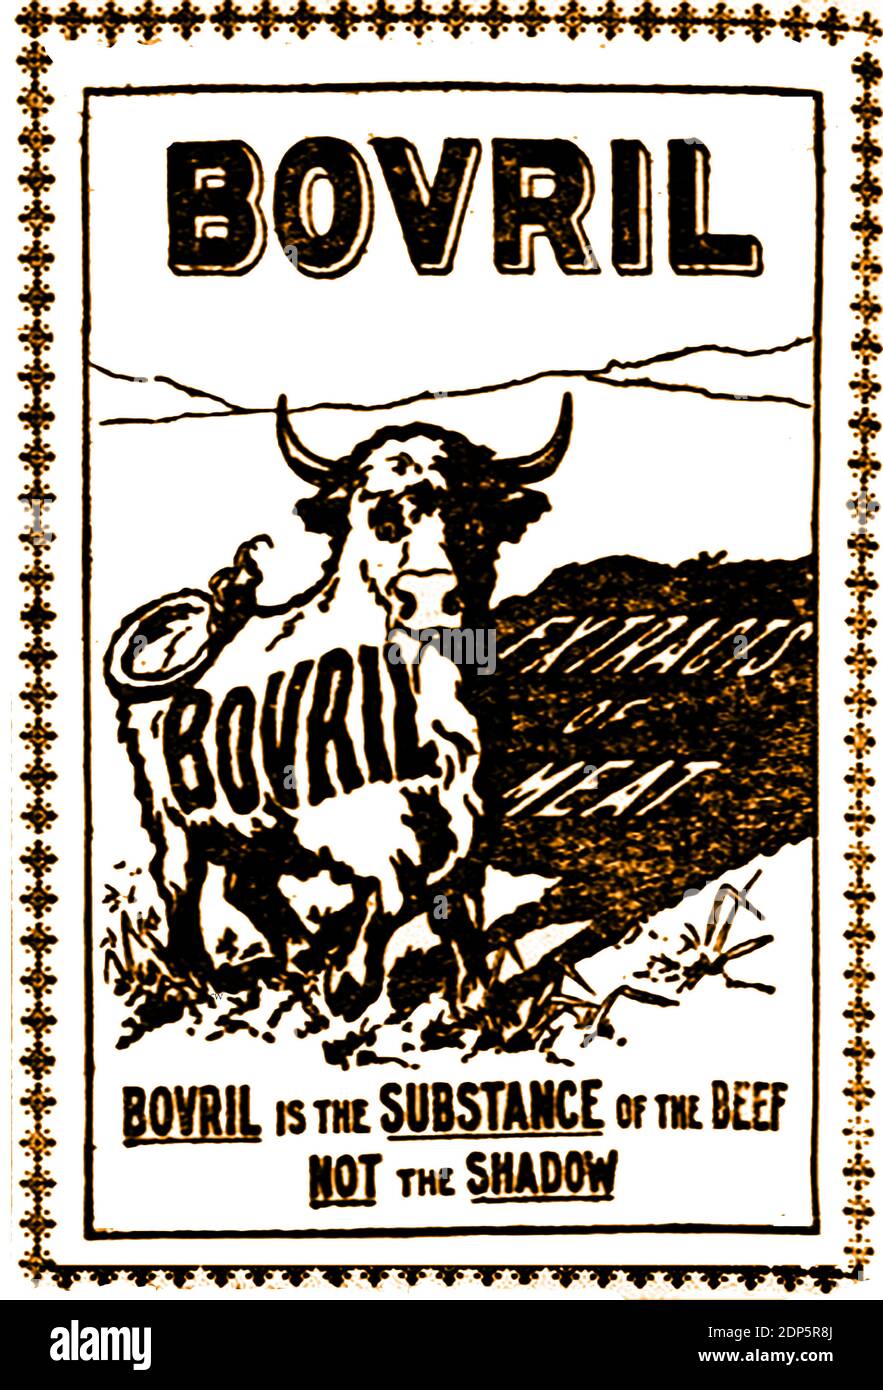 A British c1899 newspaper advertisement for Bovril meat extract . It featured the Bovril Bull and the claim that 'Bovril is the substance of the beef, not the shadow'.    In 1870, during the Franco-Prussian War, Napoleon III ordered one million cans of beef to feed his troops. The task went to John Lawson Johnston, a Scotsman living in Canada. Transport and storage being a problem, Johnston created an extract  known as 'Johnston's Fluid Beef', later called Bovril, which readily found huge sales in British grocers,  public houses,  and  chemists (for use as a tonic food for invalids). Stock Photo